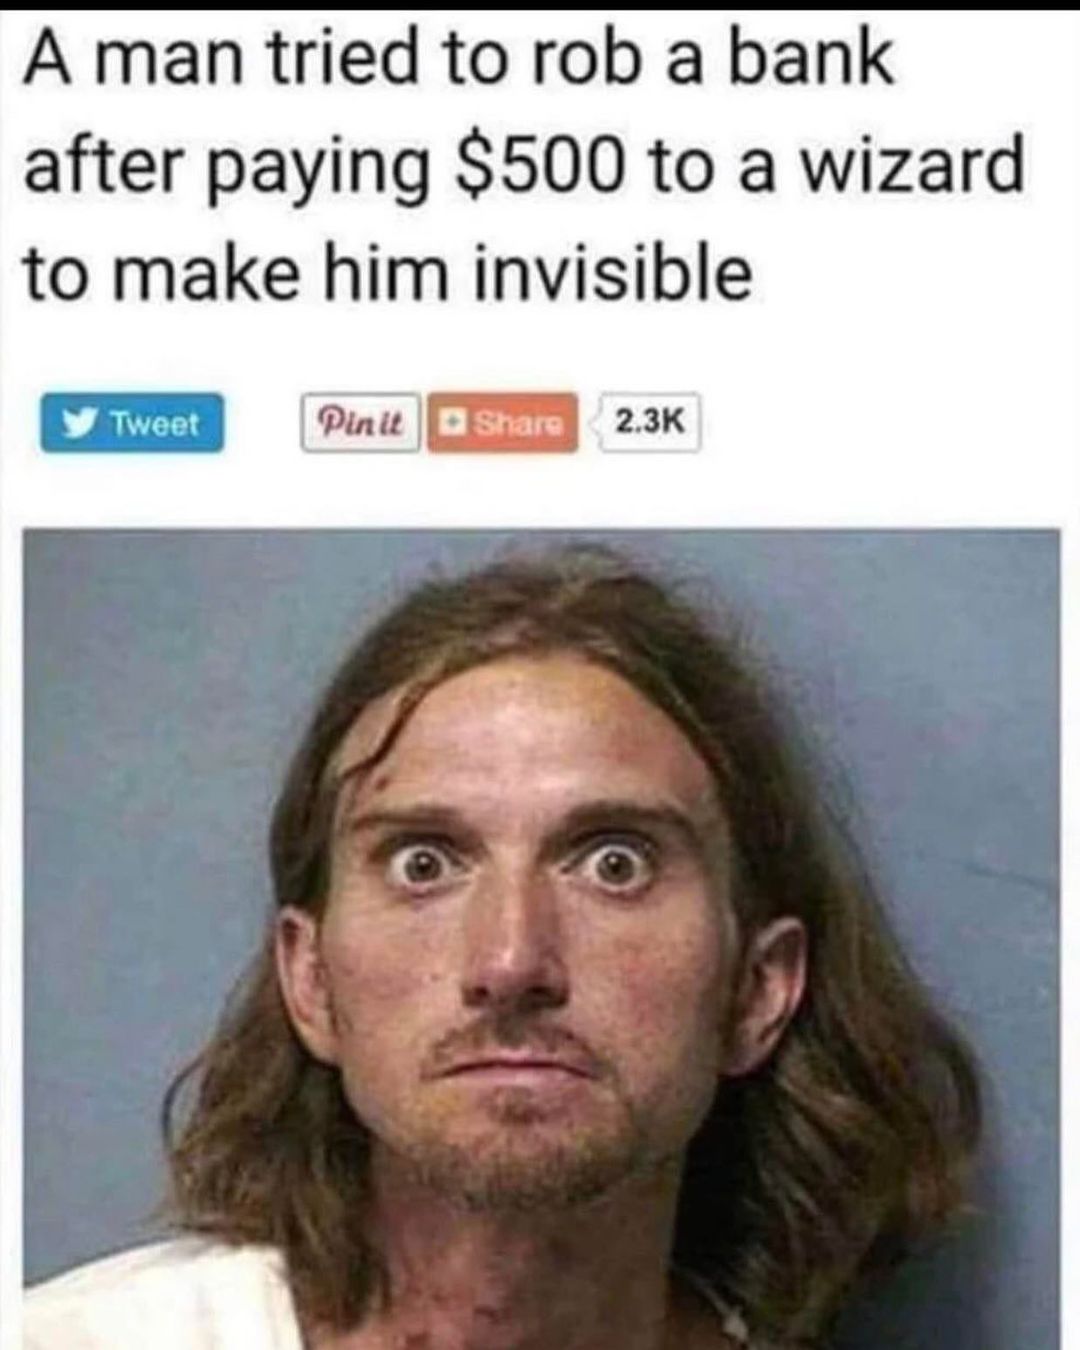 A man tried to rob a bank after paying $500 to a wizard to make him invisible.